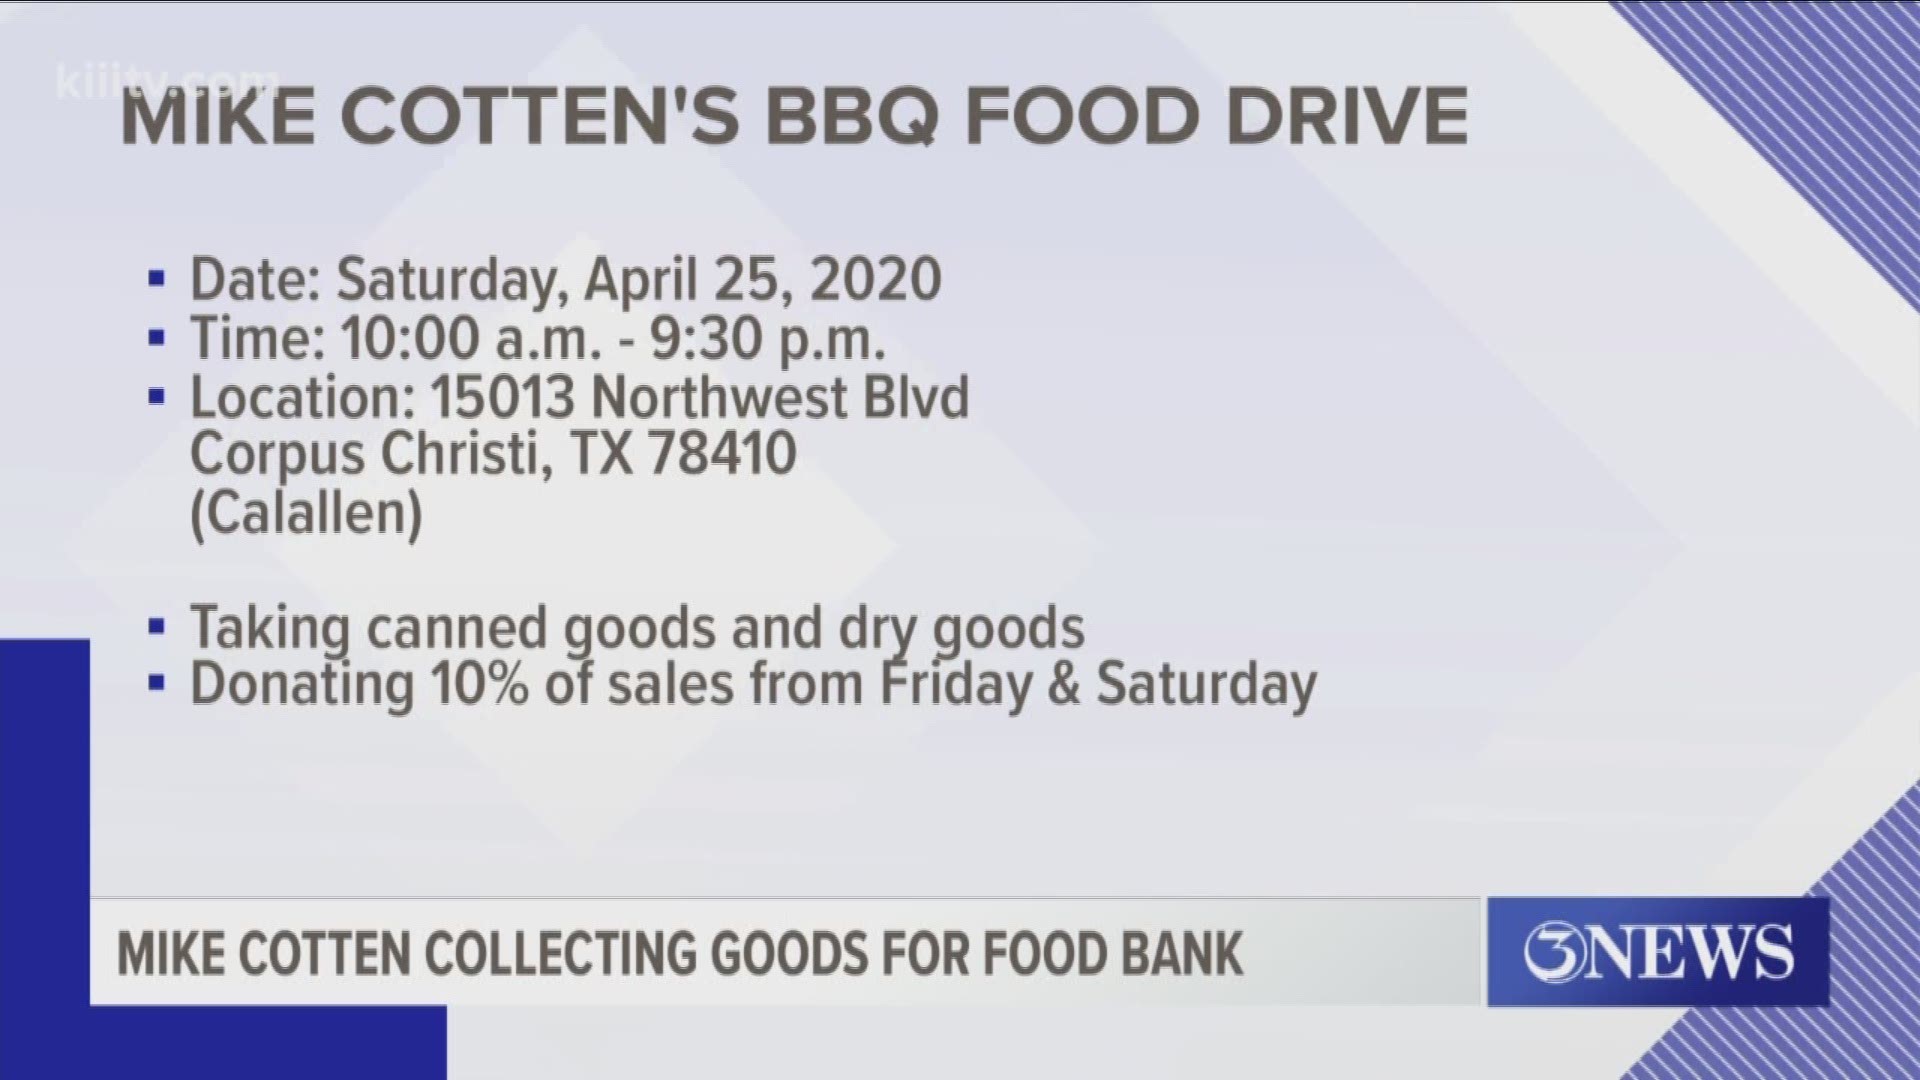 Mike Cotten’s BBQ in Calallen will be accepting donations Friday and Saturday.